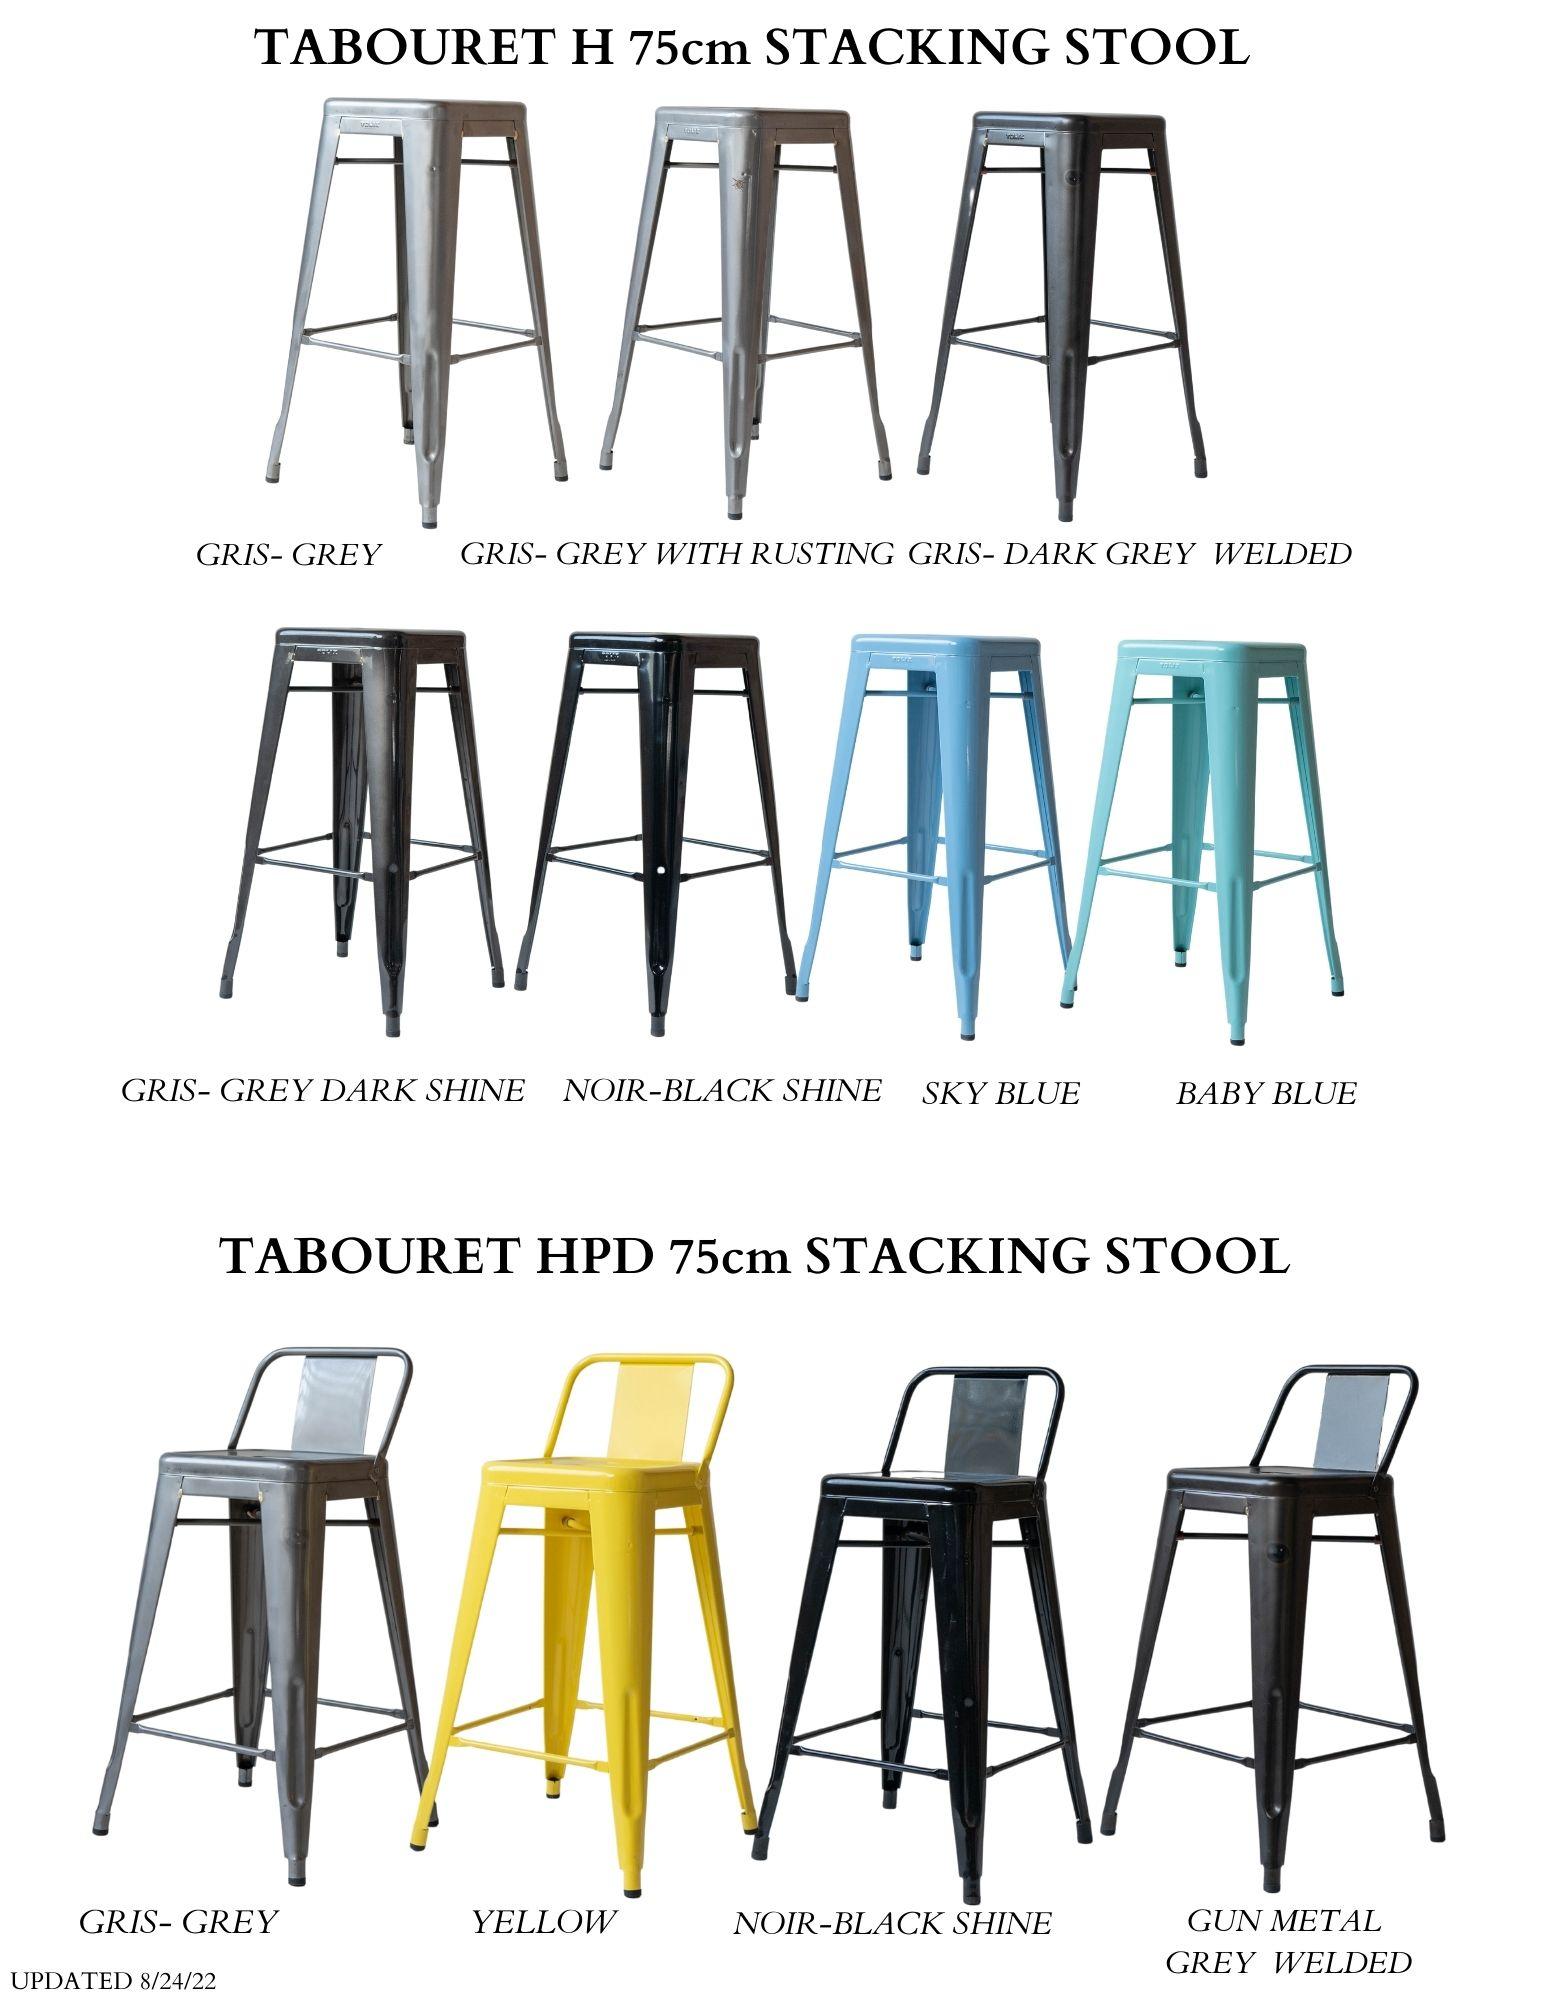 Authentic French Tolix Steel Stacking Chairs, Showroom Samples 100's Available 13